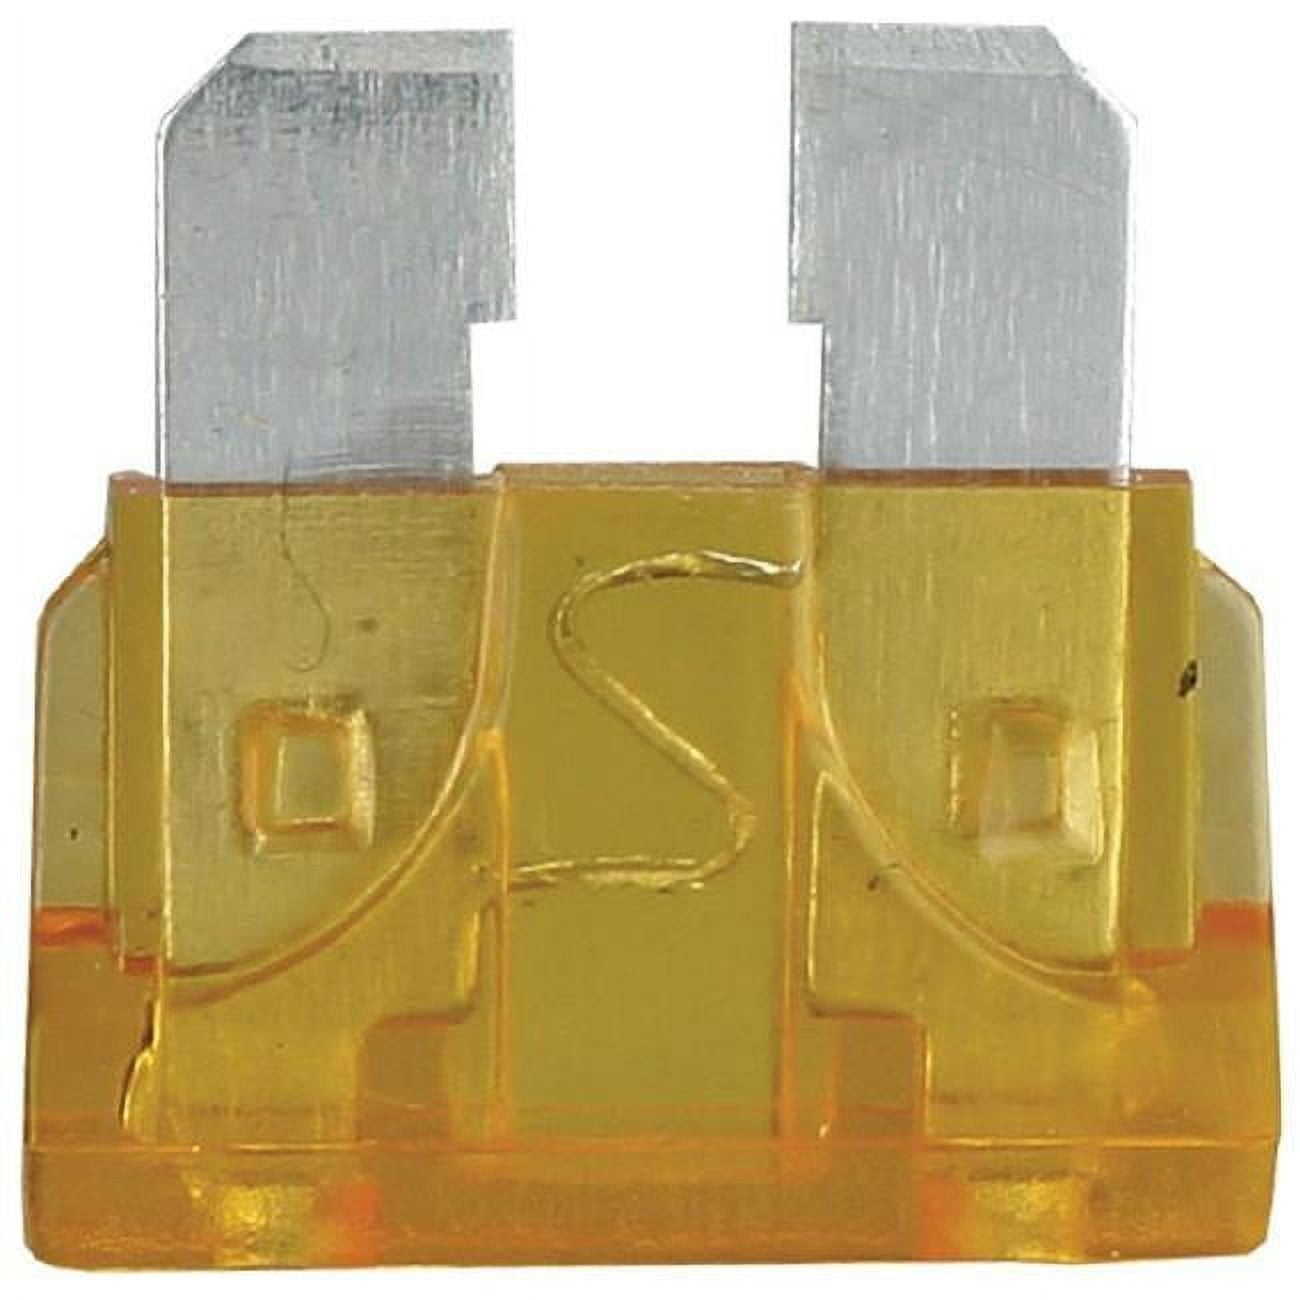 Ato7.5-25 Fuse Atc 7.5a, Pack Of 25